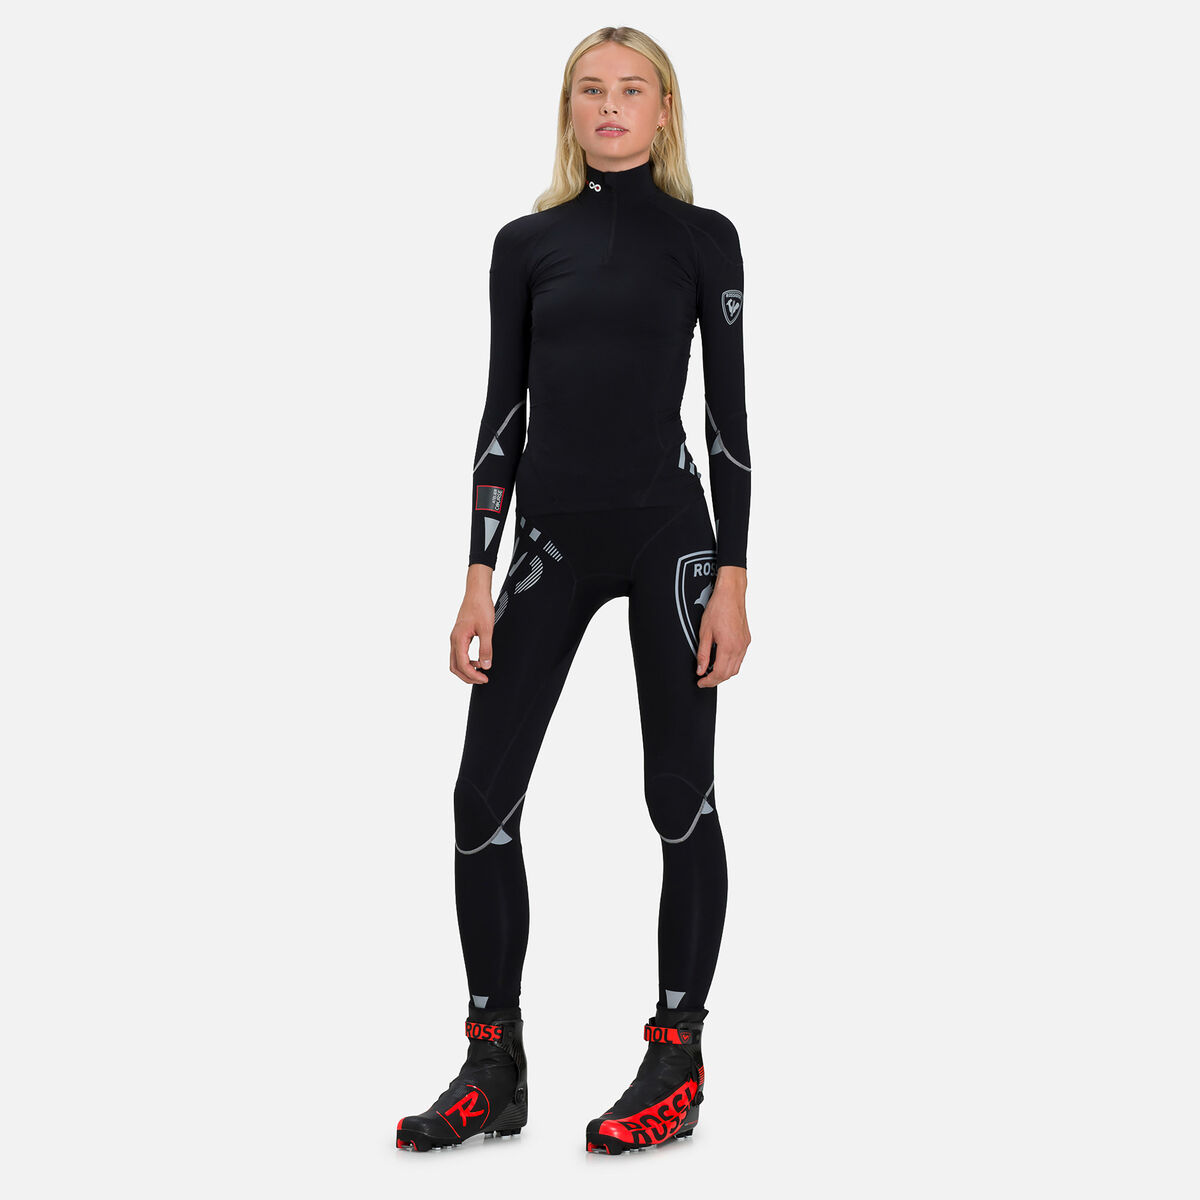 Rossignol Infini Compression Race Top Onyx Grey Base layer/thermal tops :  Snowleader